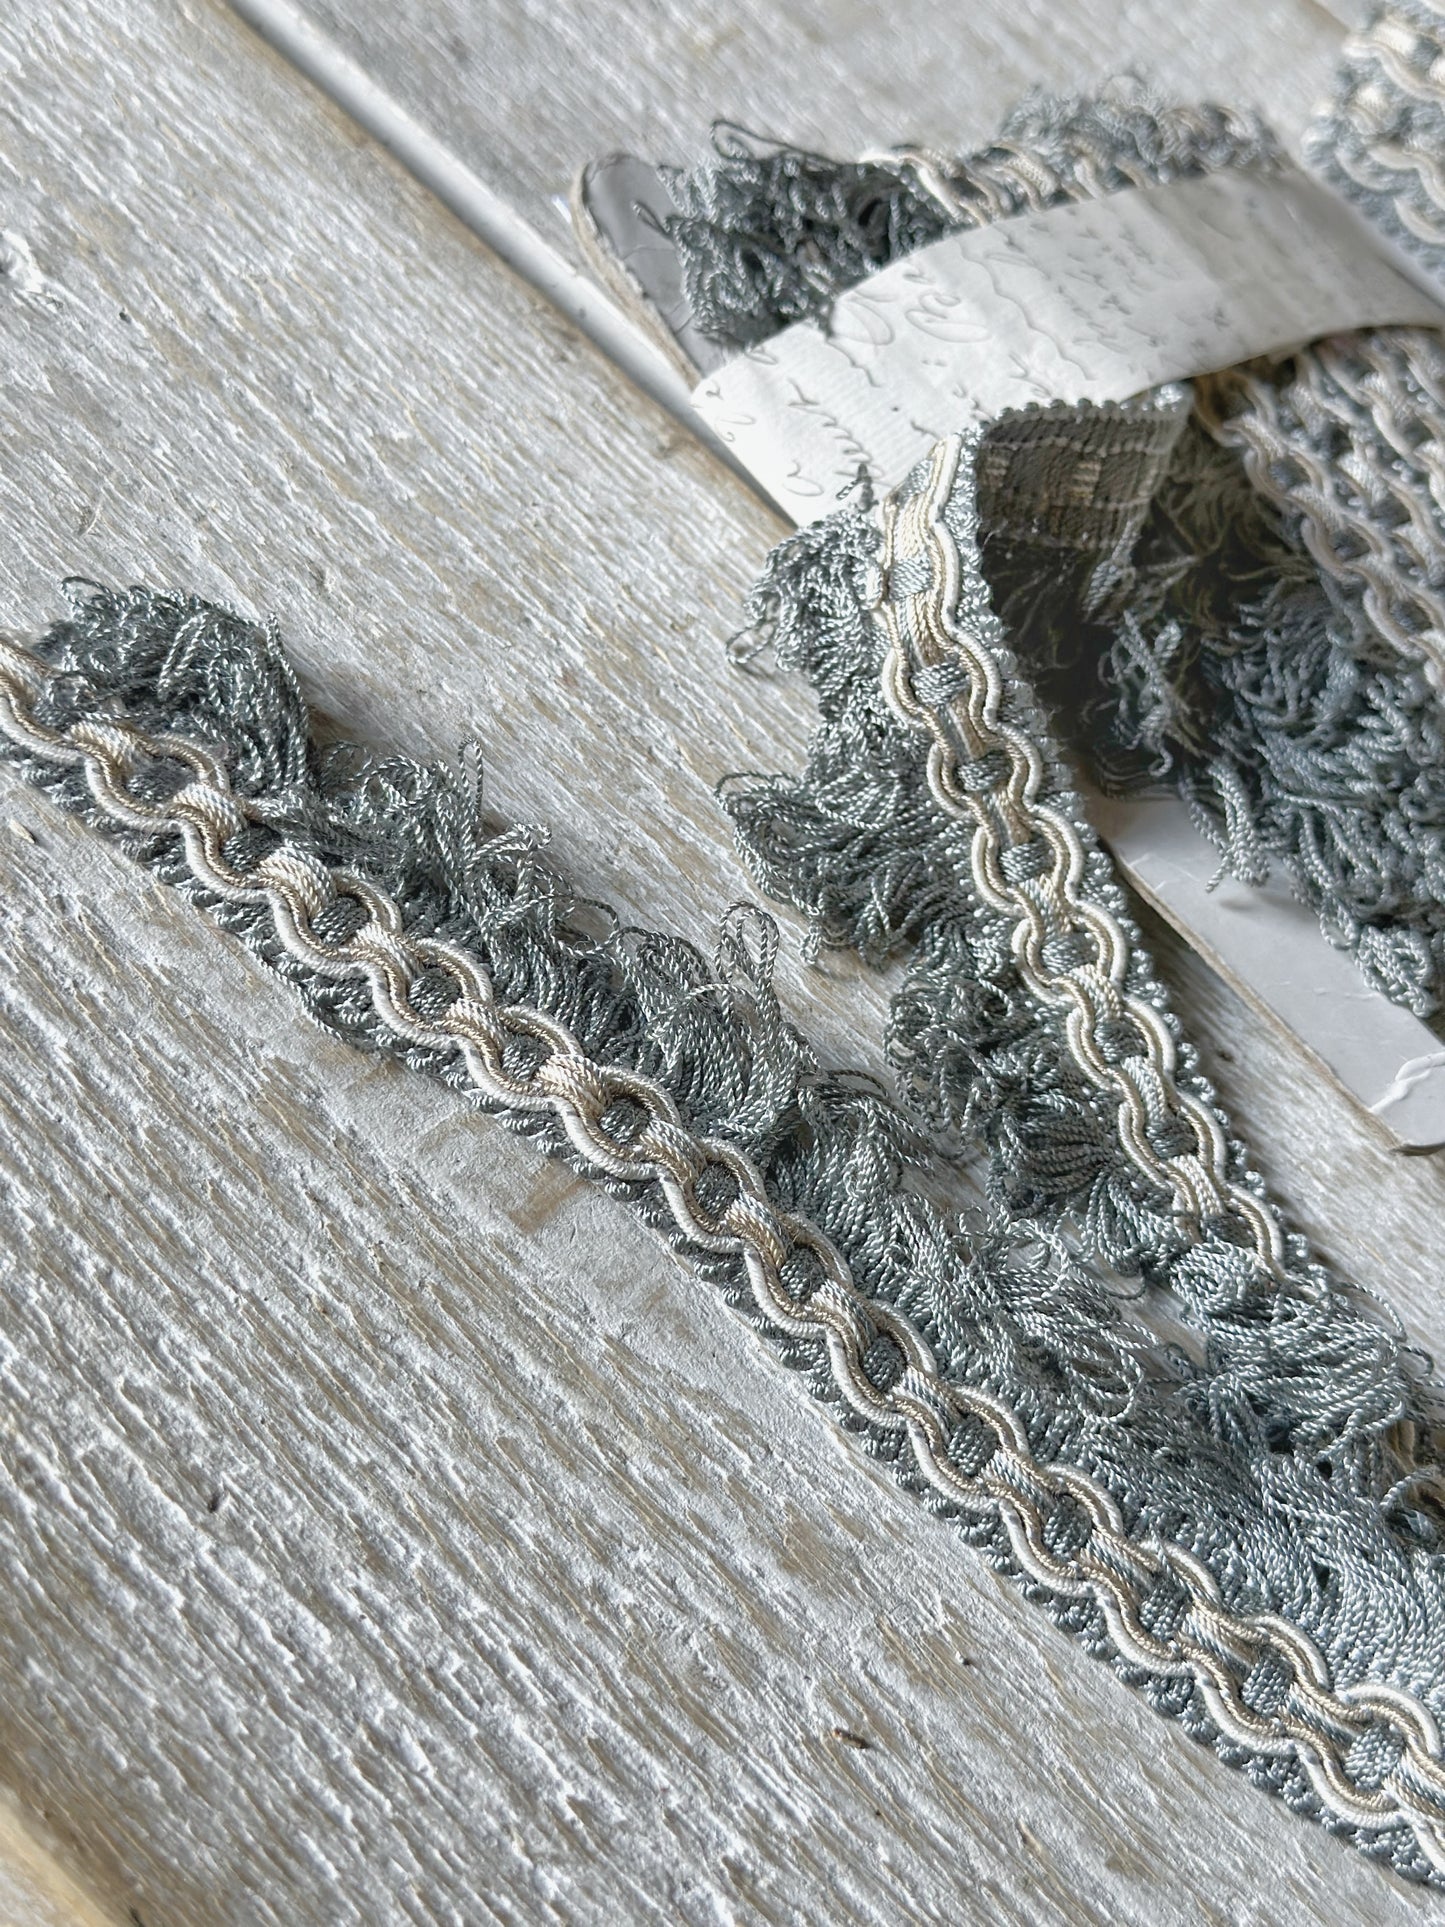 A lovely bundle of vintage trim or passementerie from a French haberdashery